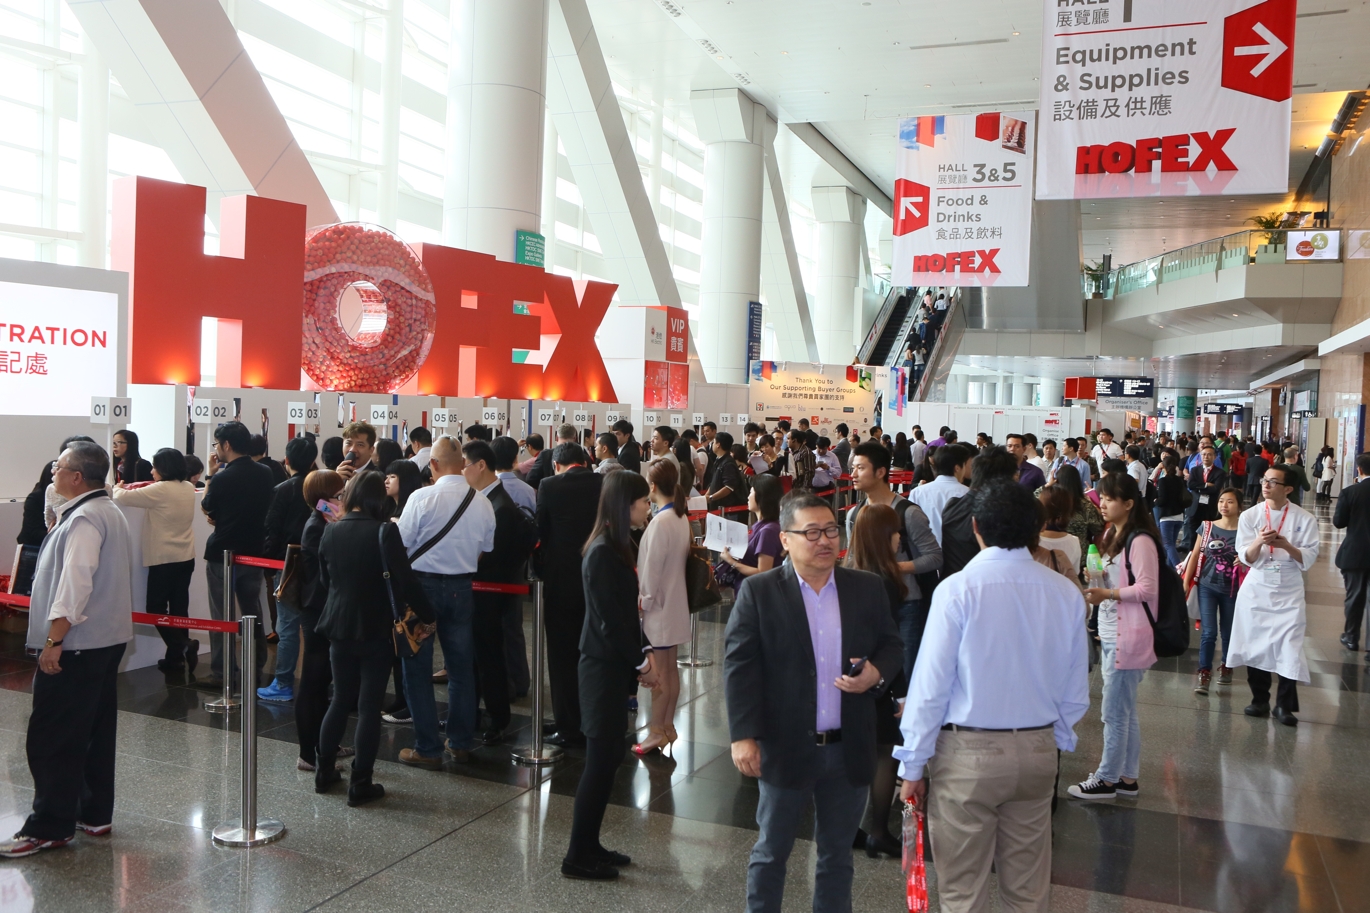 HOFEX 2015 will take place in the award-winning, multipurpose-built Hong Kong Convention and Exhibition Centre which is one of the largest in Asia. Located in the heart of Wanchai on the Hong Kong Island, the centre is one of the world’s most impressive, efficient and functional exhibition venues for exhibitors and buyers alike